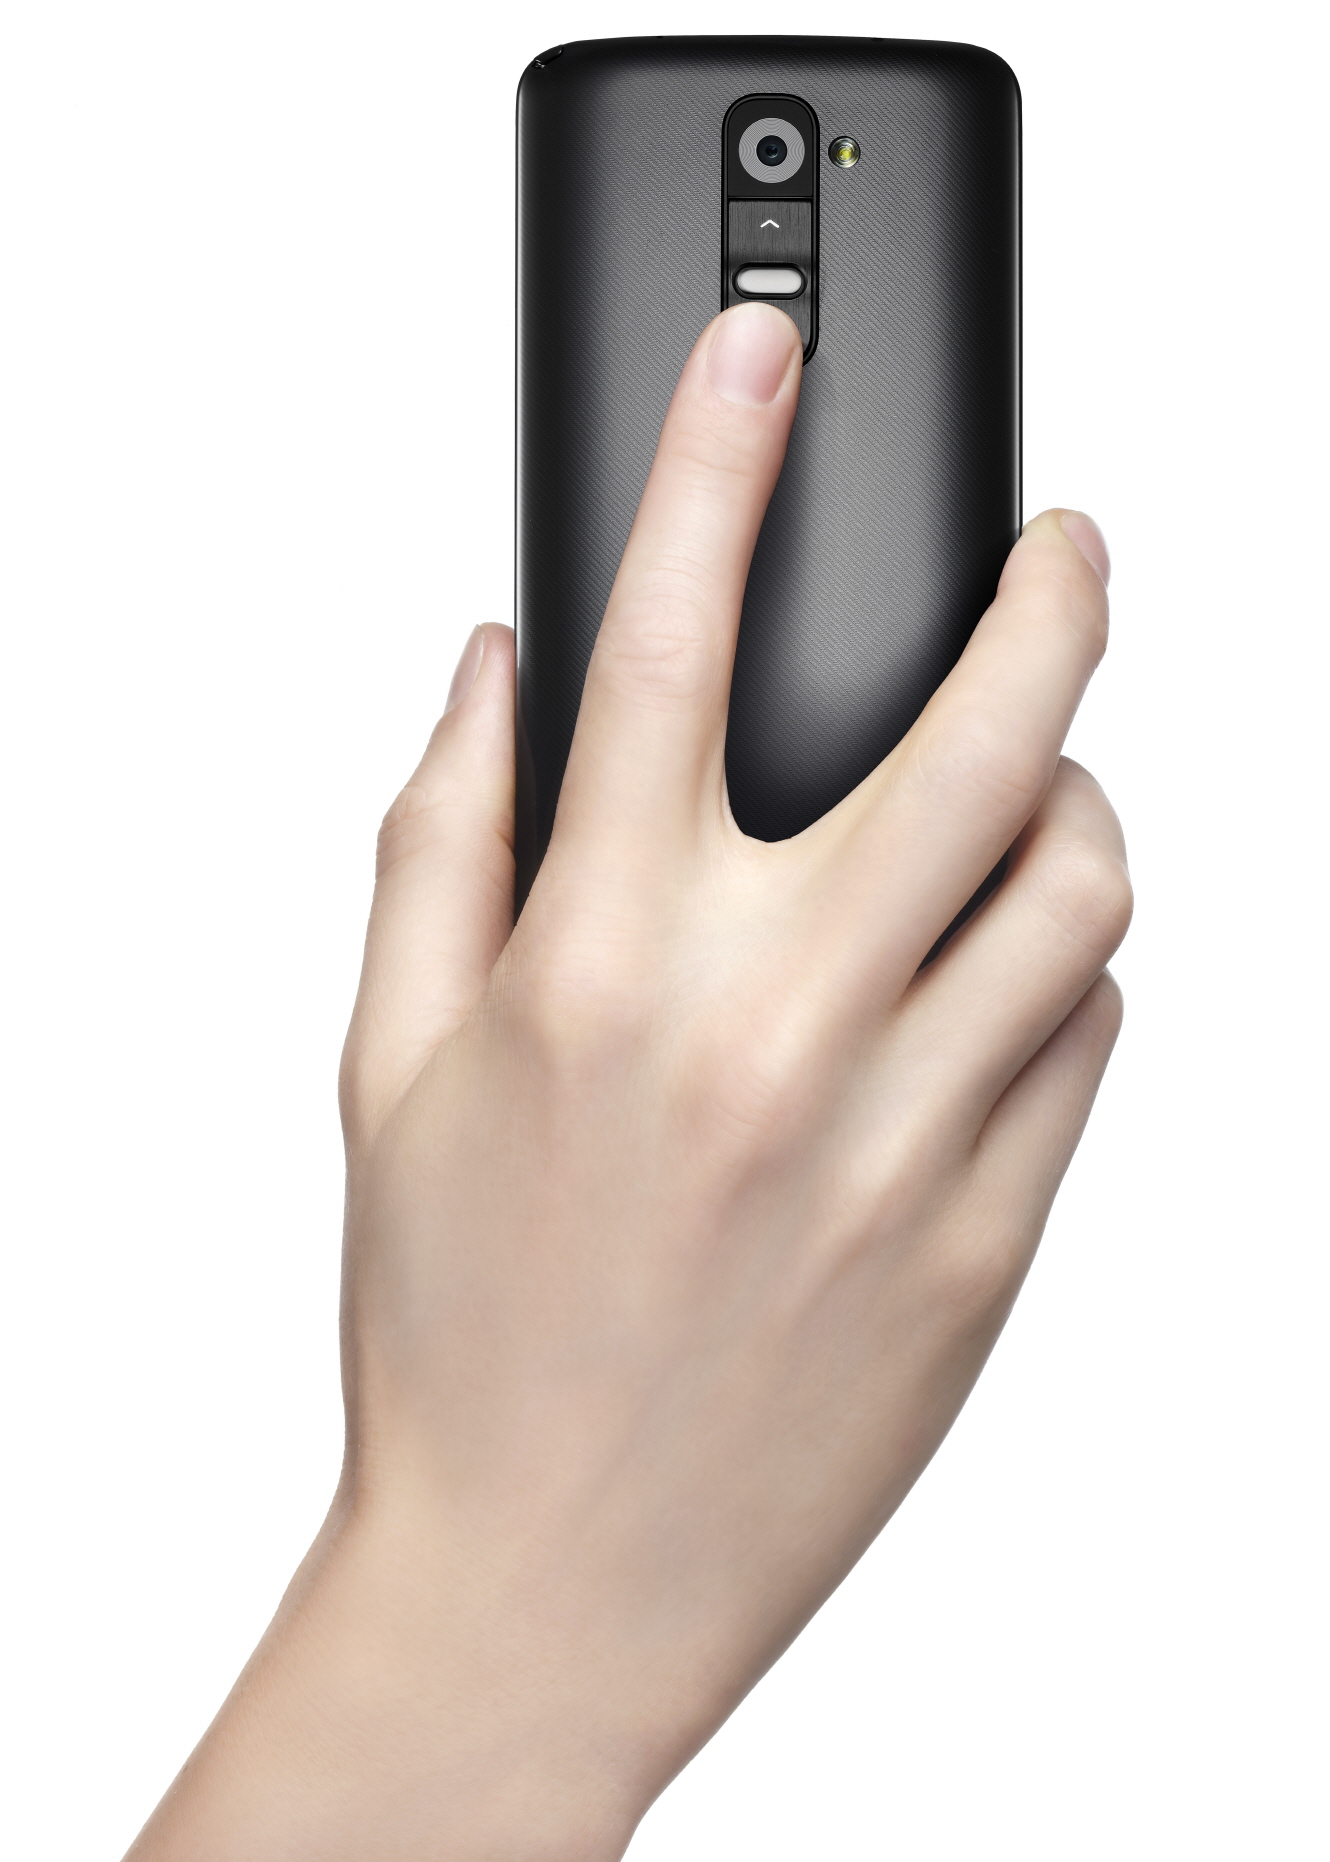 A person’s hand using the rear fingerprint sensor on the back of the LG G2.